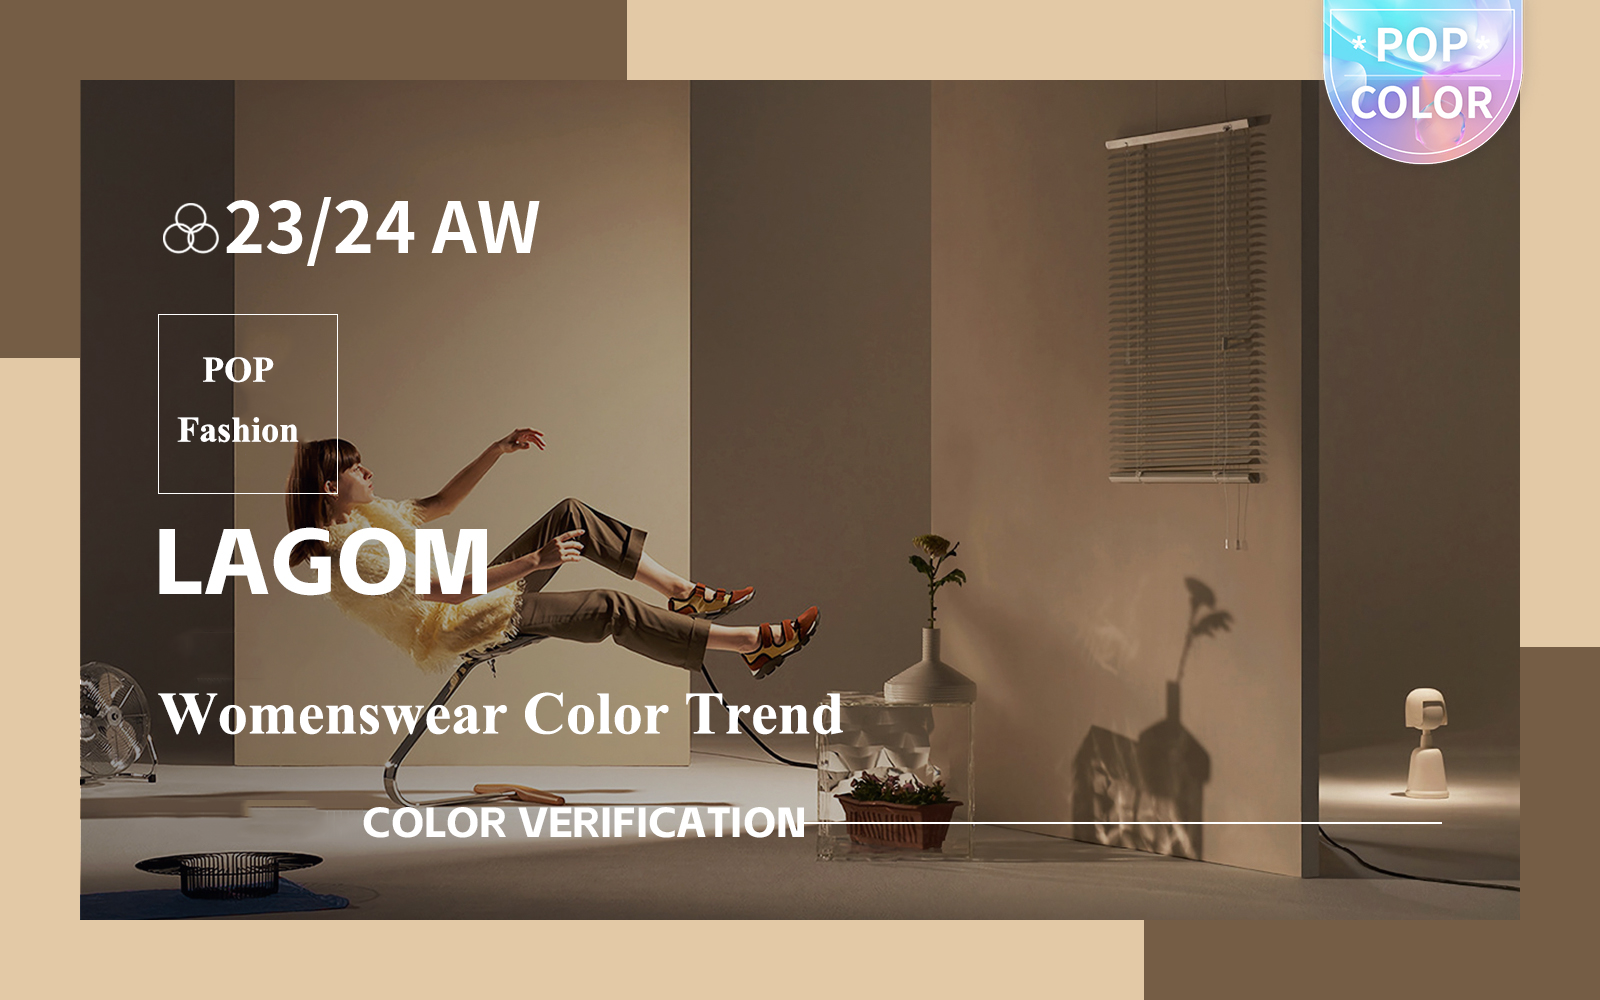 Lagom -- The Color Trend Verification of Womenswear